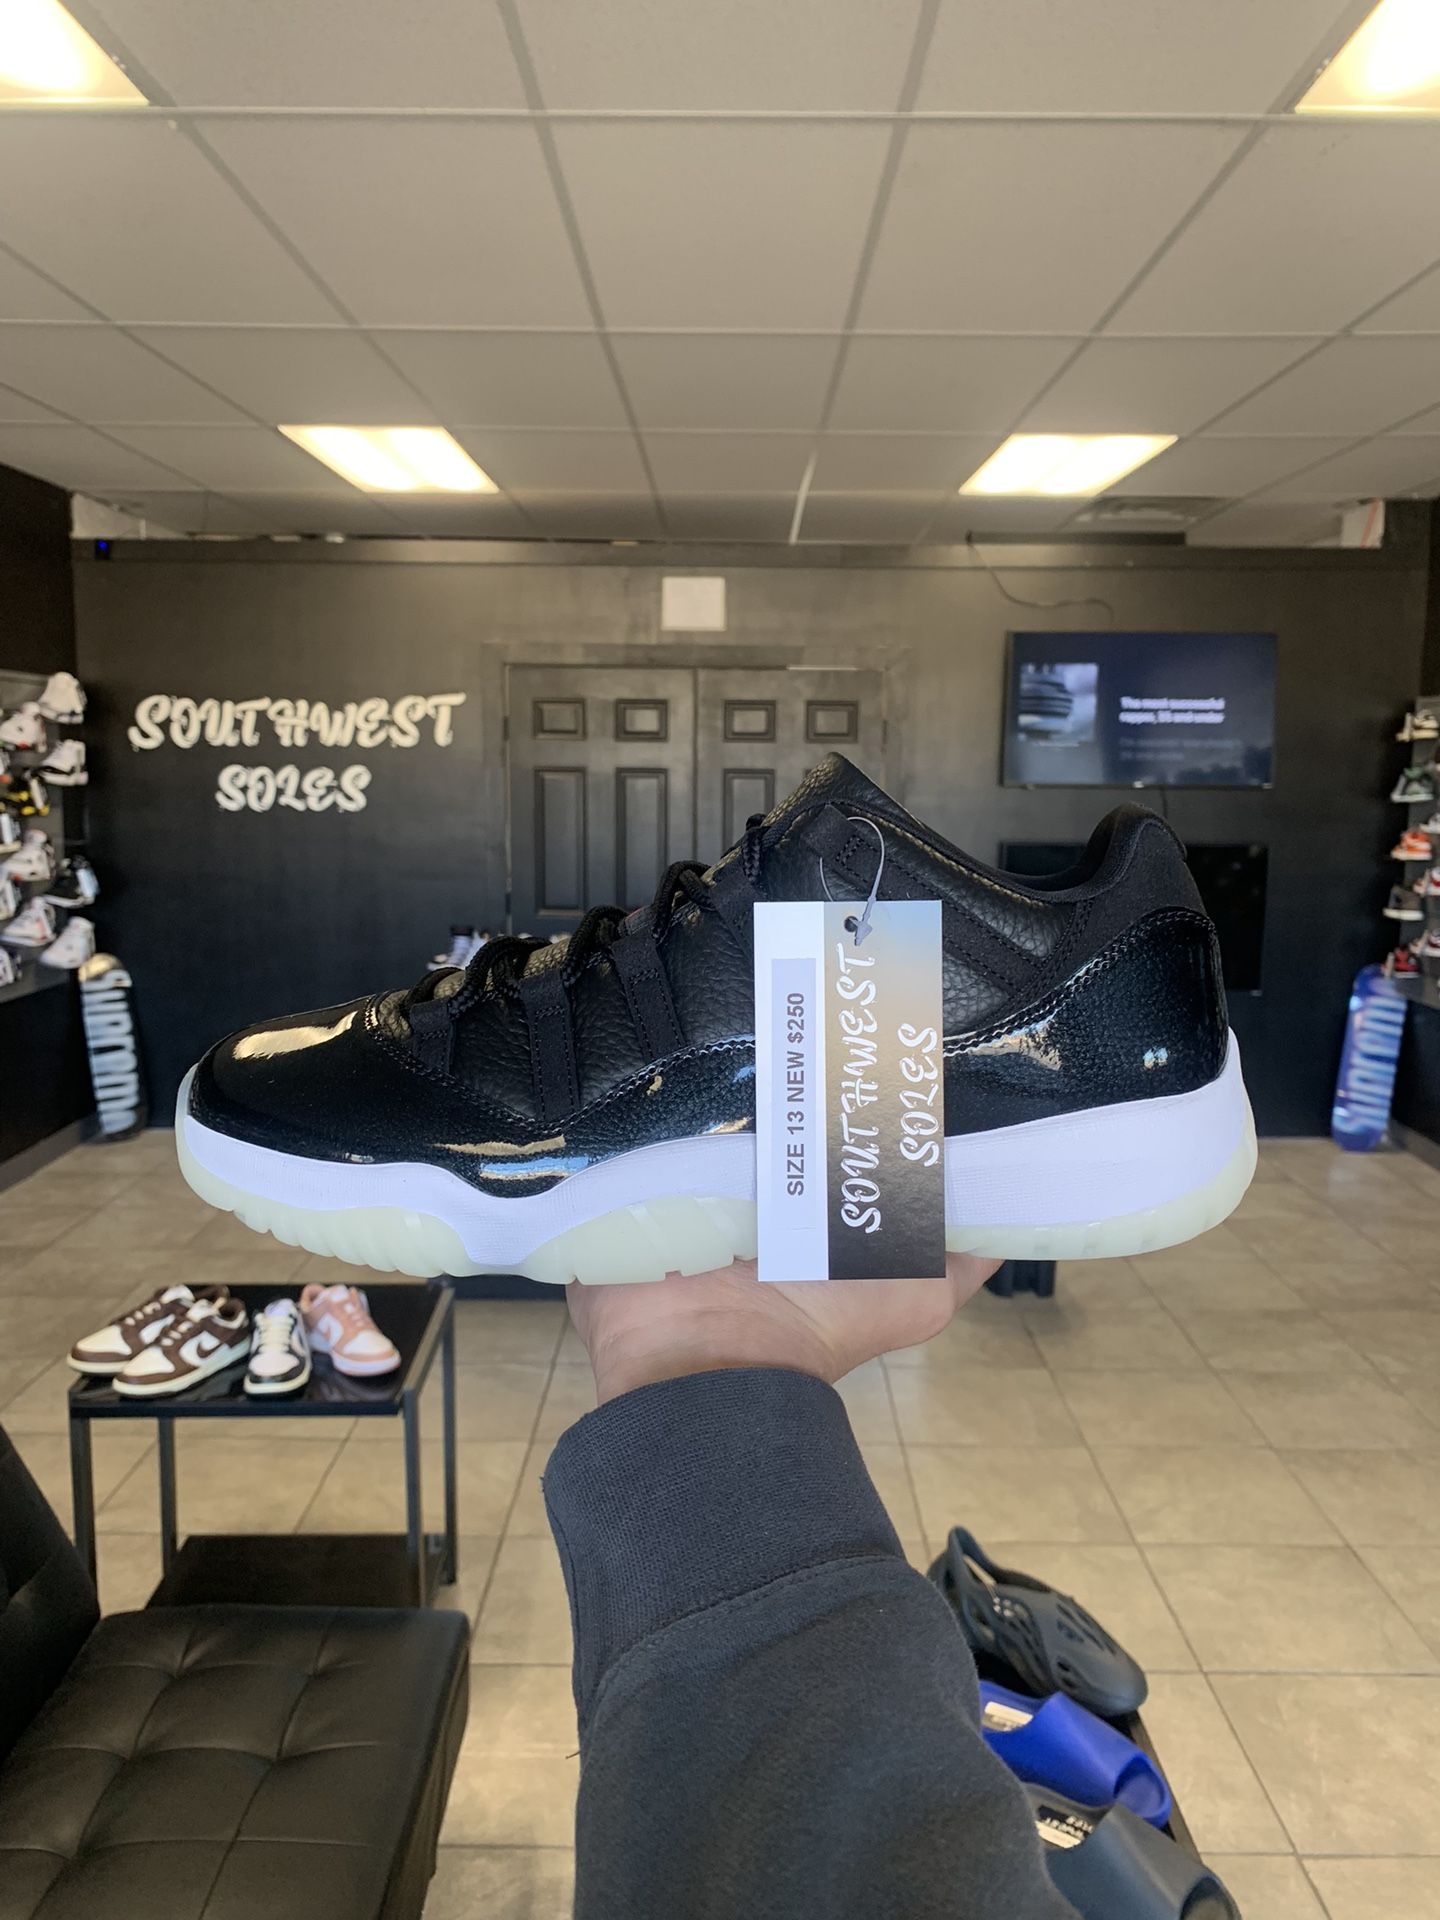 Jordan 11 Low 72-10 Size 13 Available In Store!